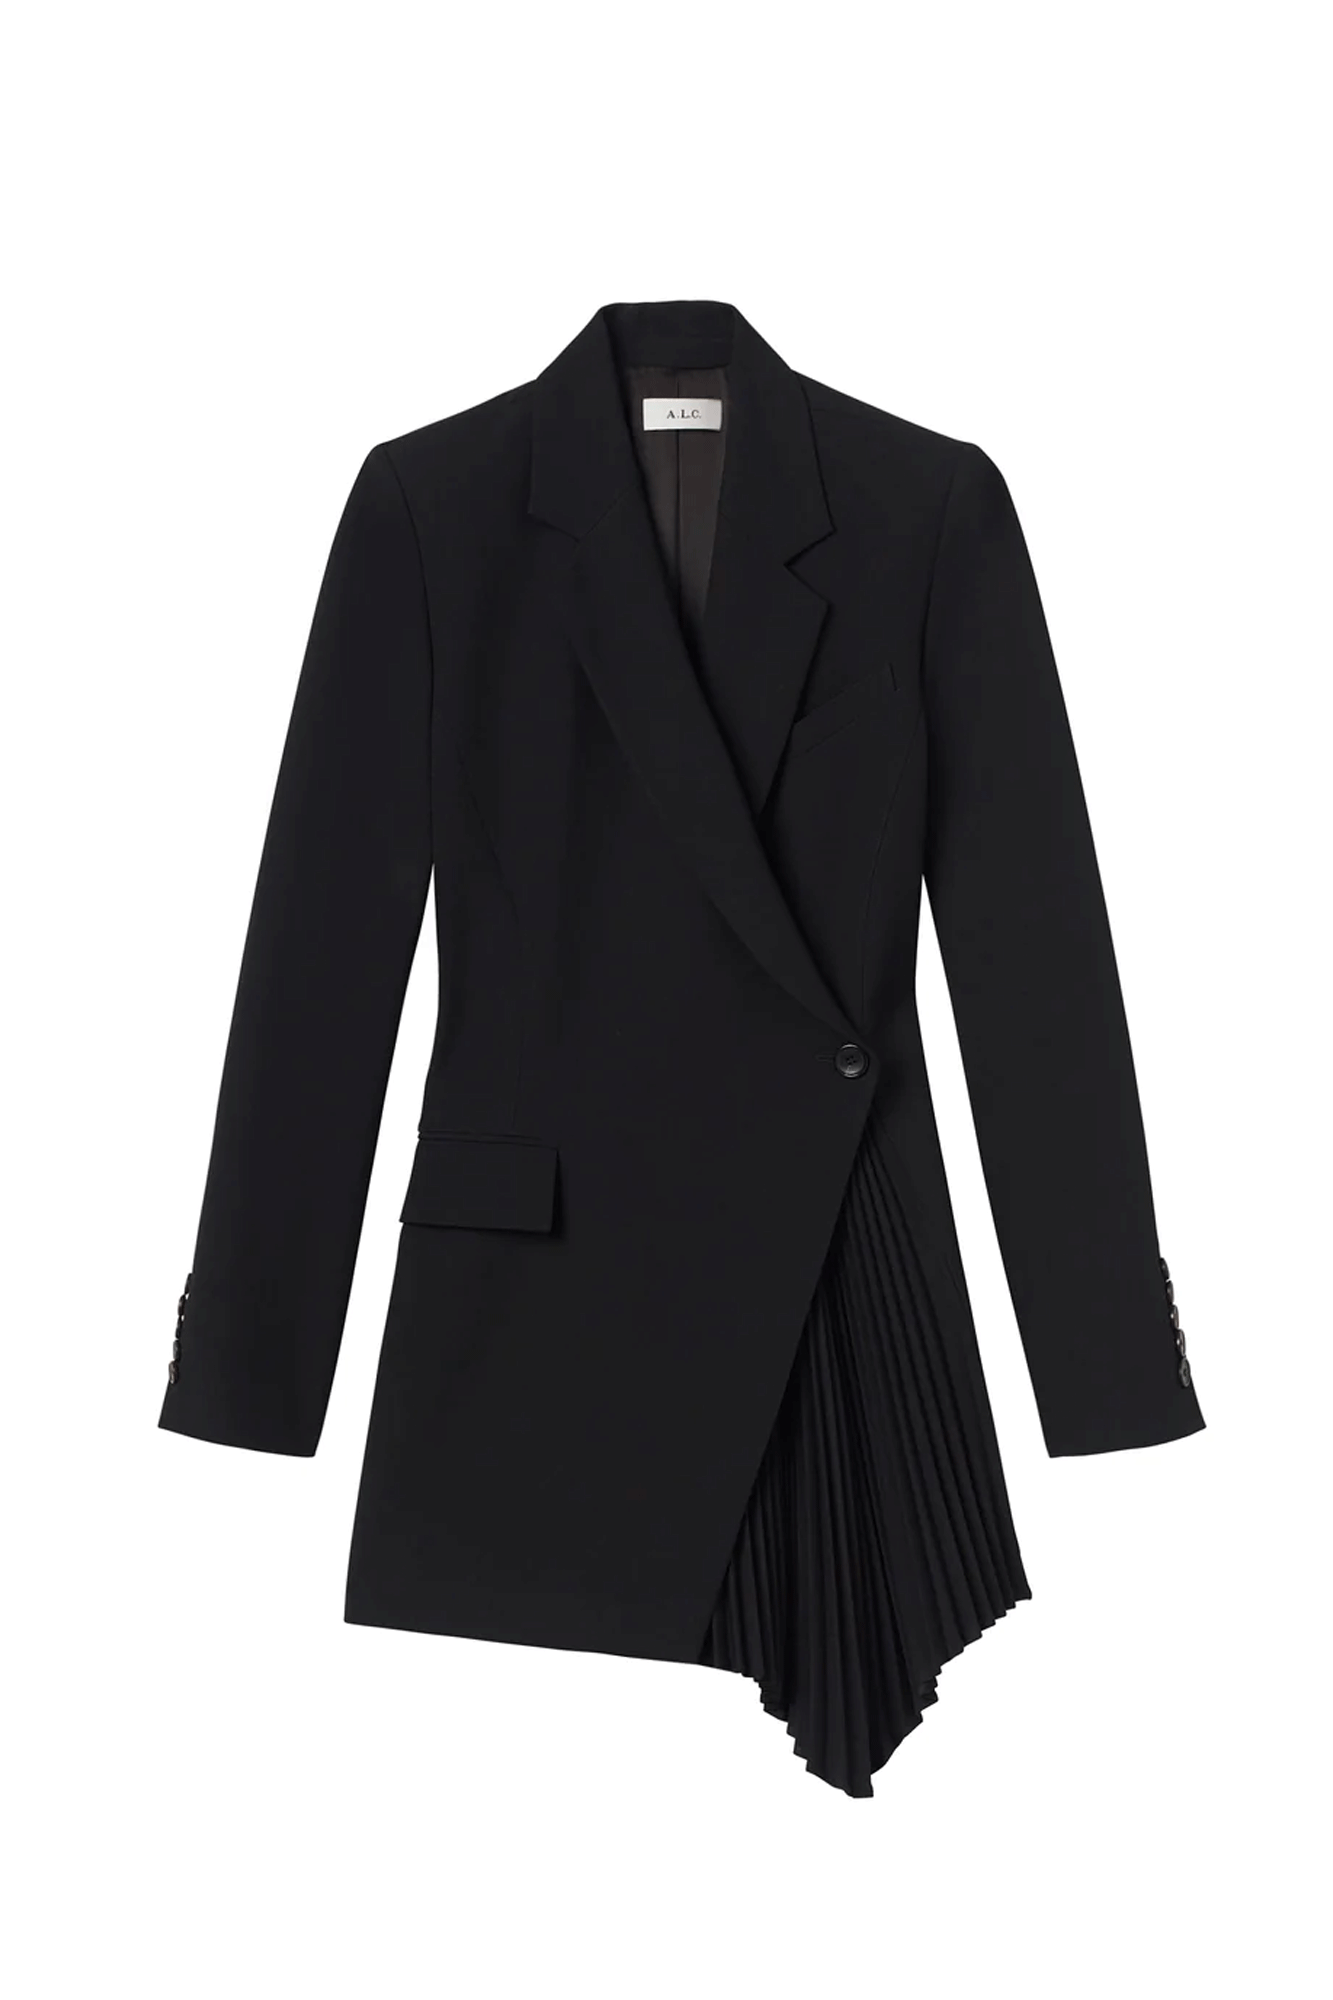 Look timelessly sophisticated in the Juliet Dress from A.L.C. Crafted from signature suiting fabric in classic black, this mini blazer silhouette features modern twists such as pointed notch lapels and a faux-wrap waist, plus classic tuxedo-inspired details like flap pockets and an asymmetrically pleated skirt. Make a statement.